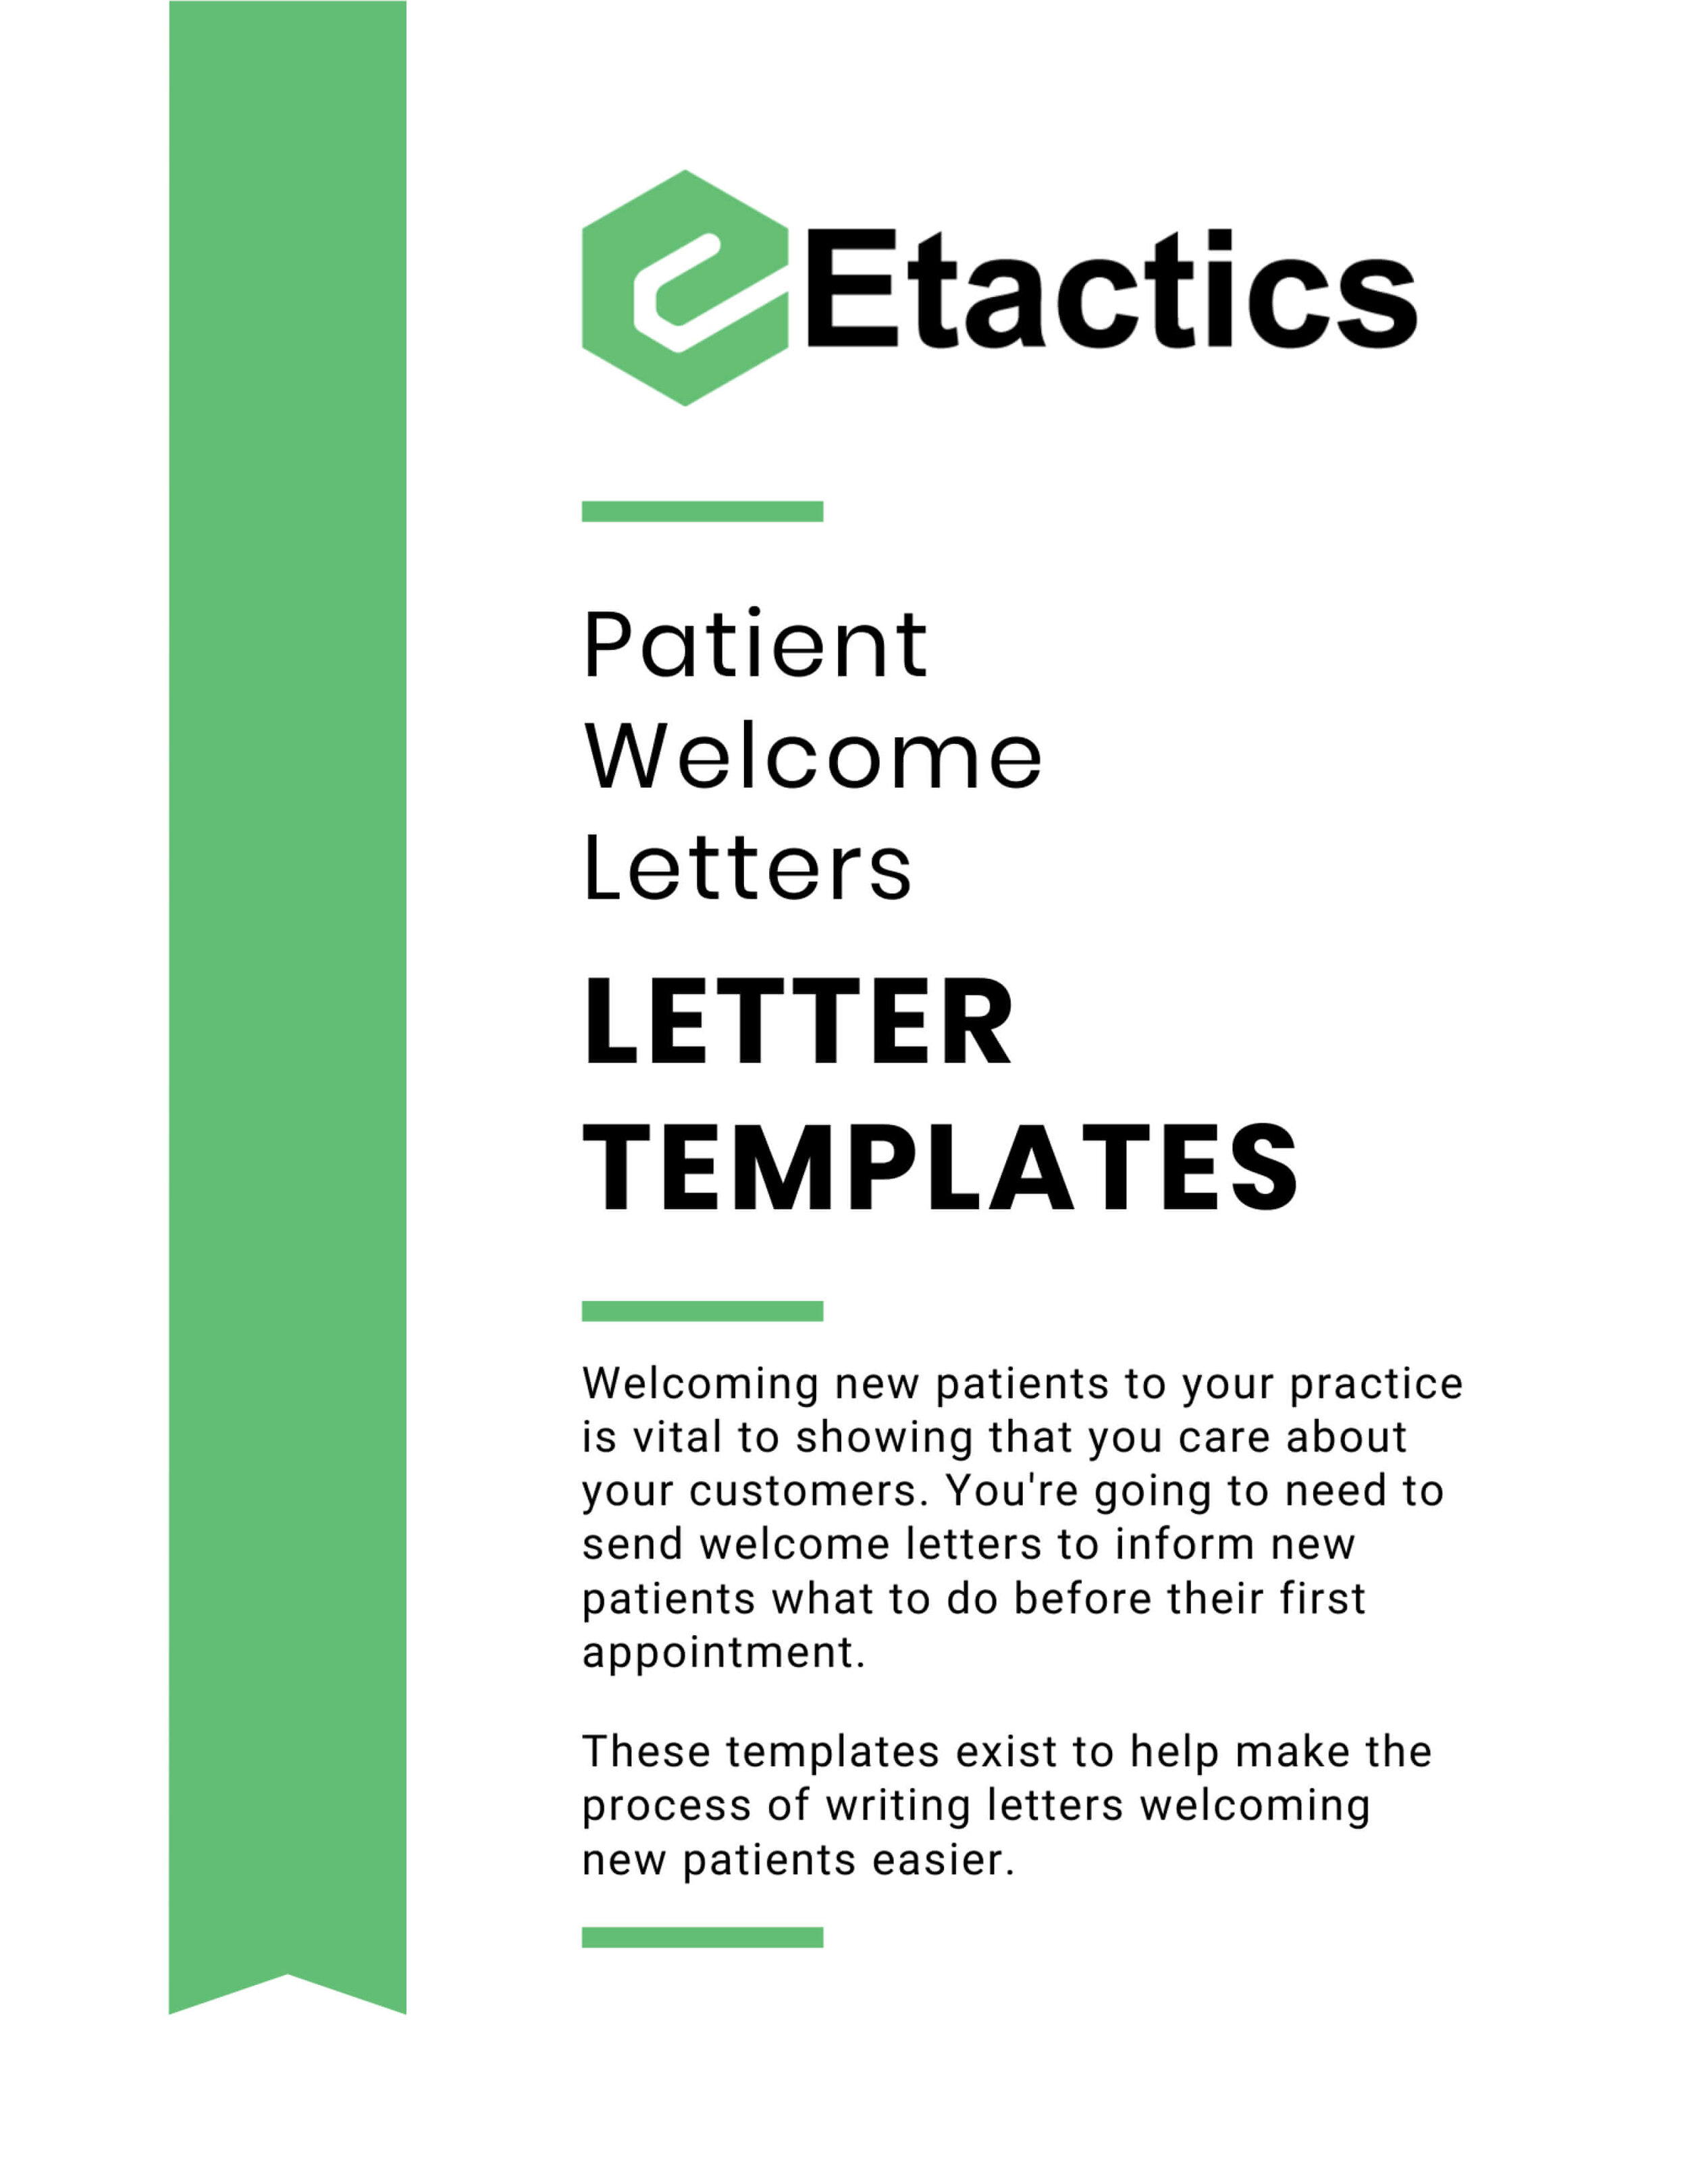 5 New Patient Welcome Letter Templates for Primary Care Physicians-1.jpg